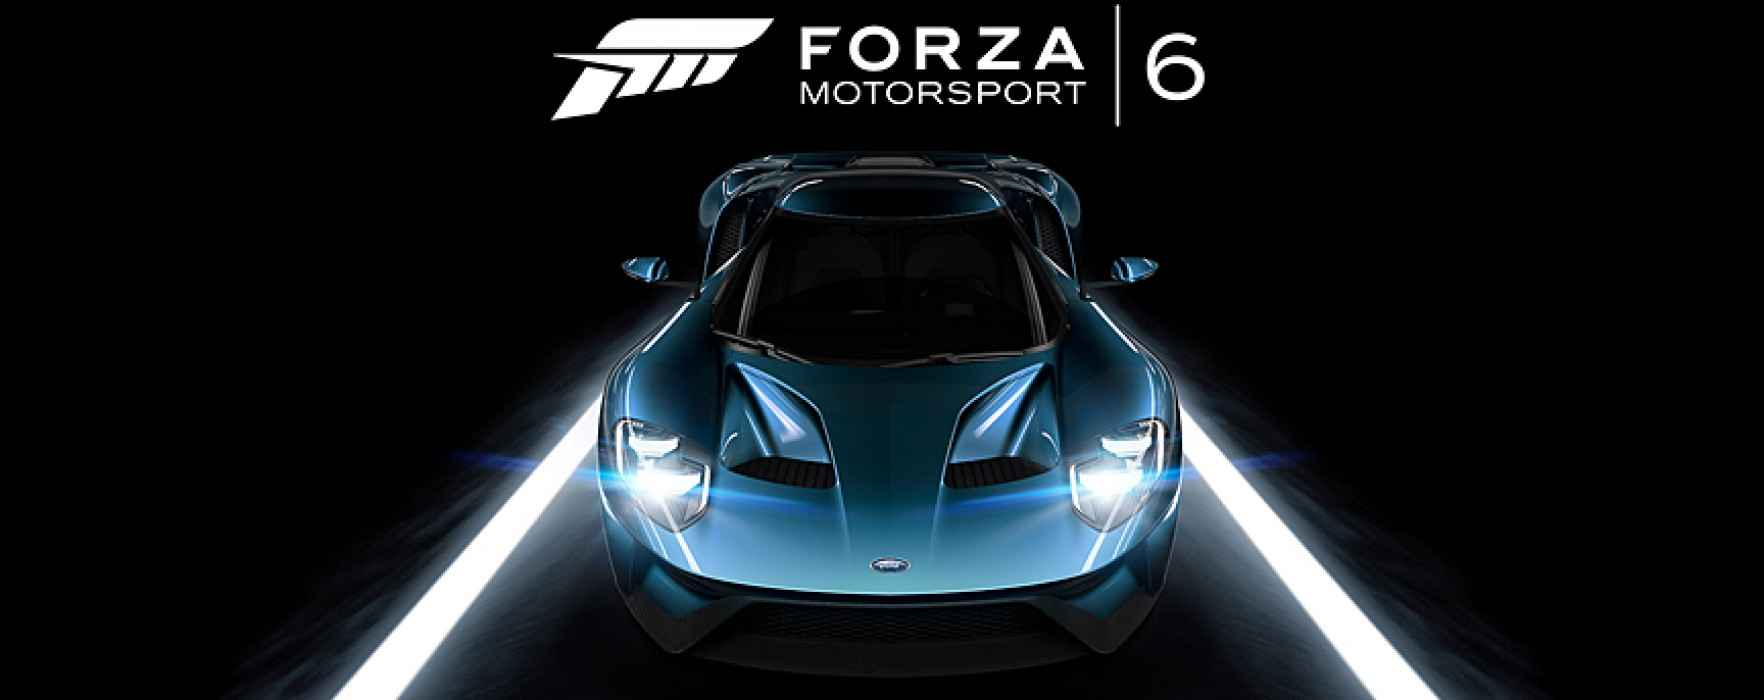 ford-gt-forza-6-1764x700